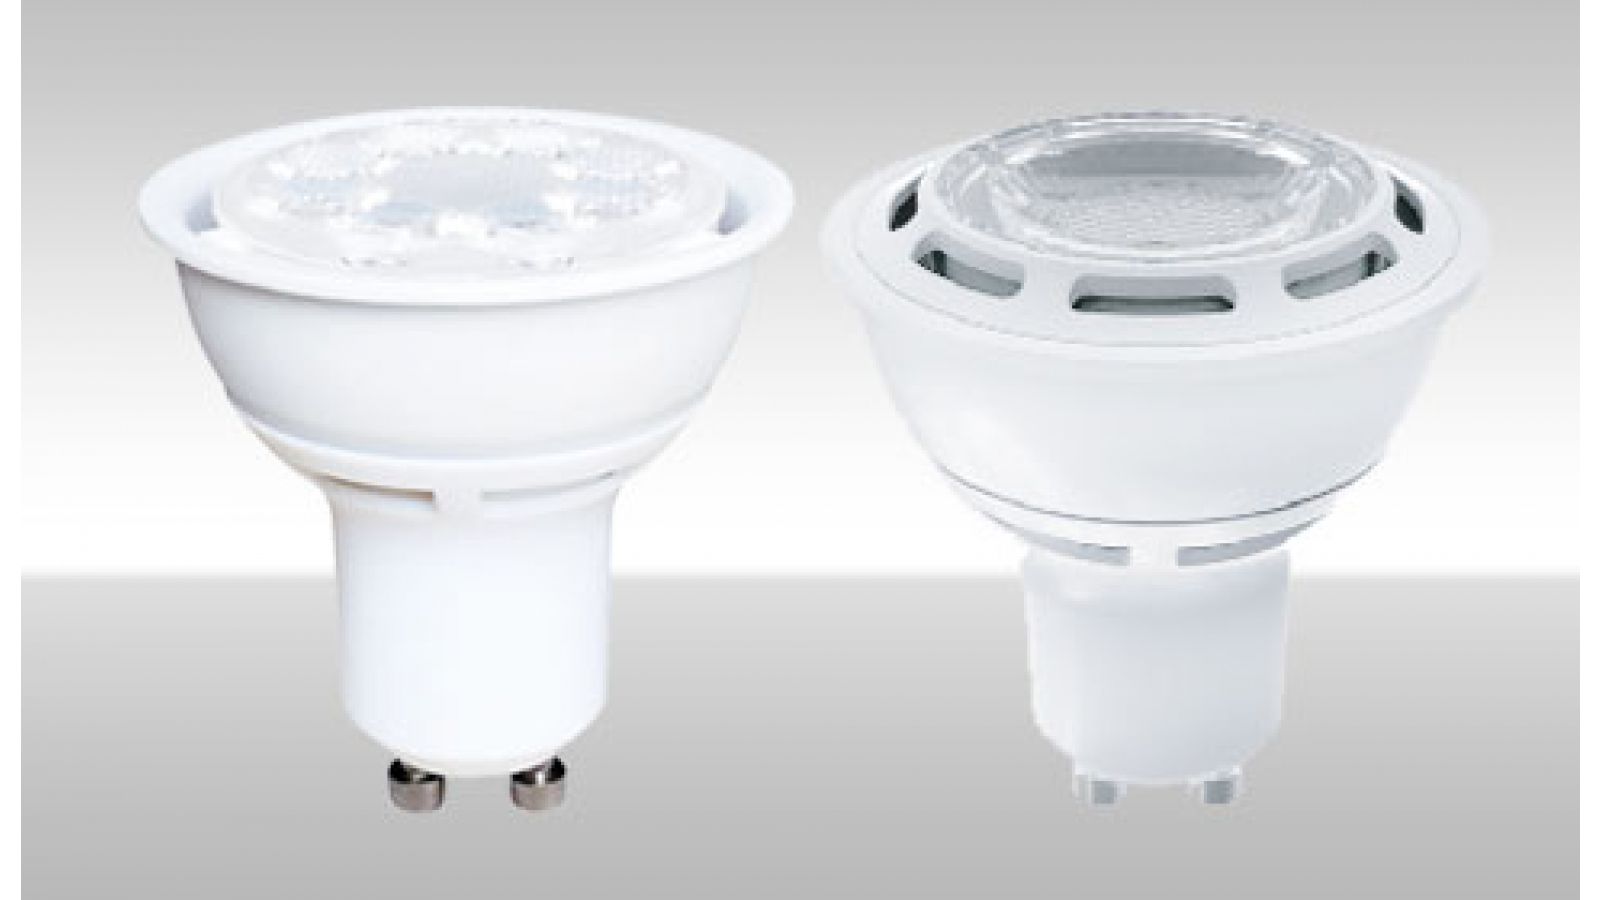 ENERGY STAR certified LED MR16 Lamps